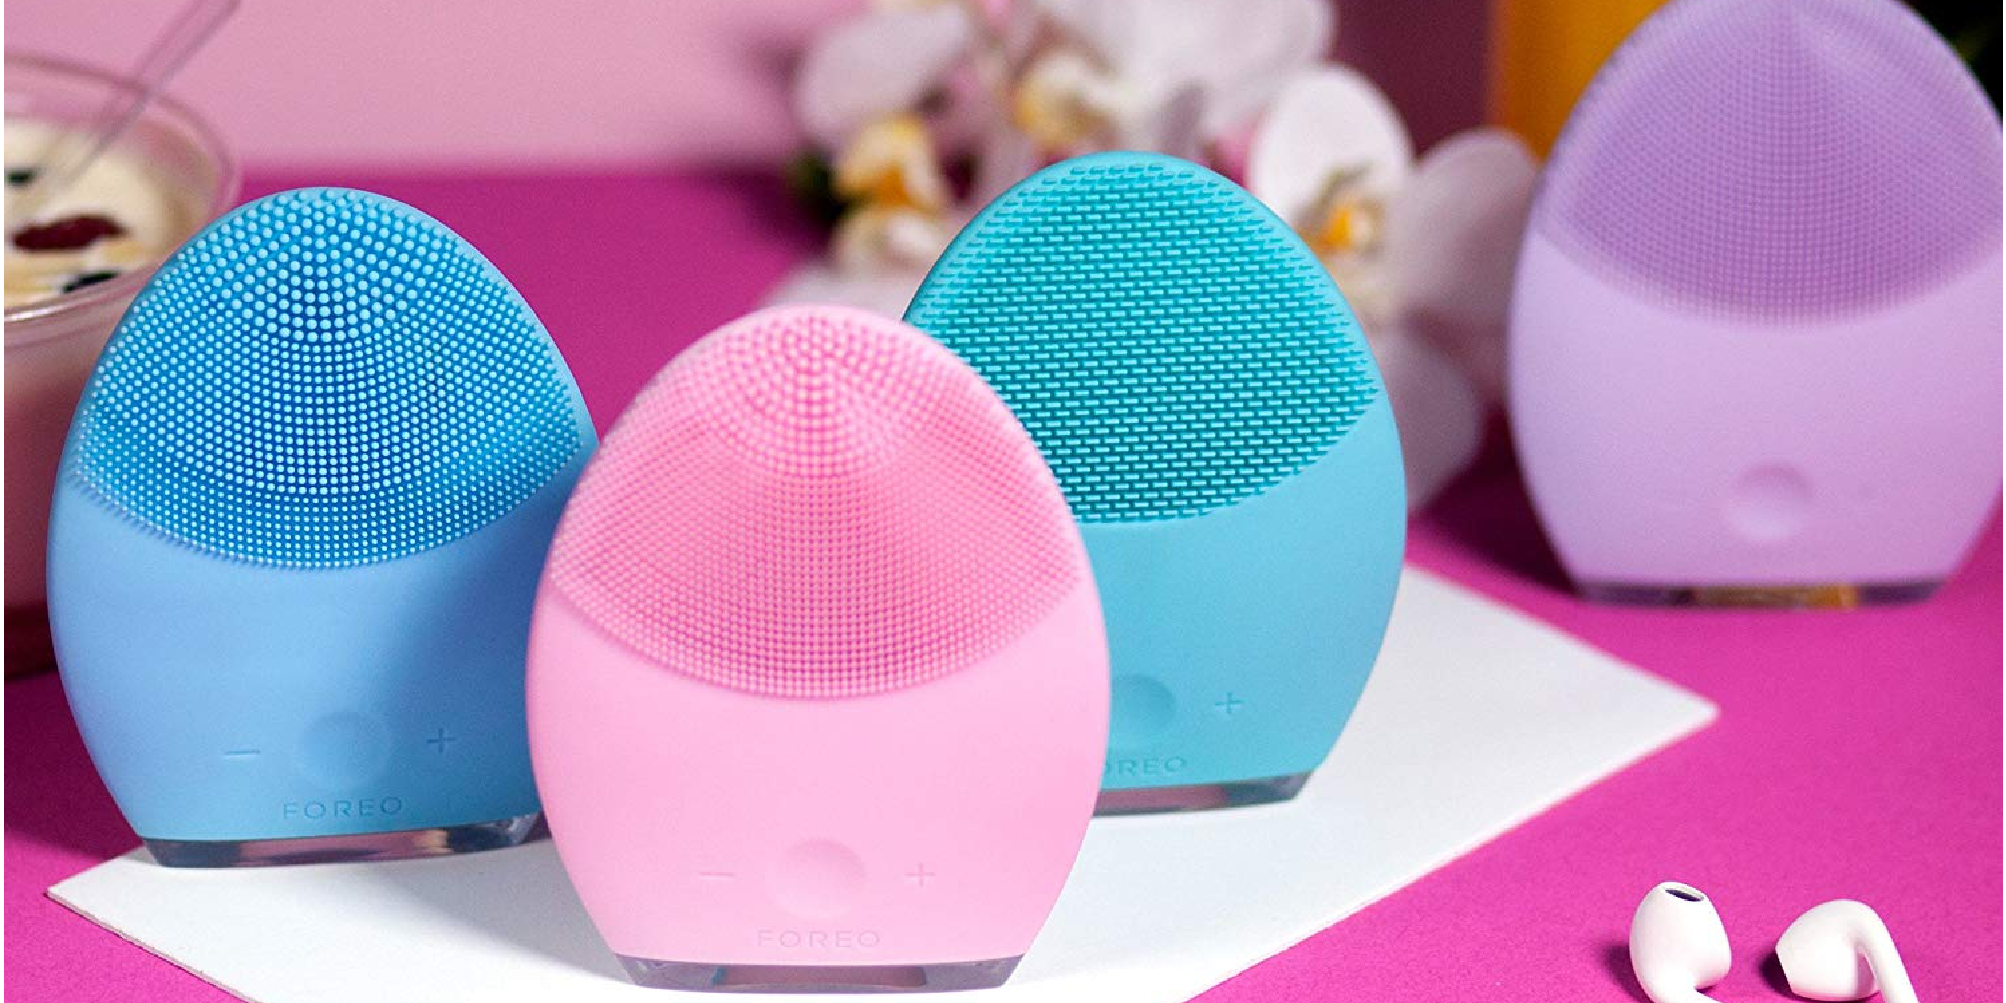 The Foreo Luna 2 Facial Cleansing Brush is back to Black Friday pricing at $139 (Save $30)